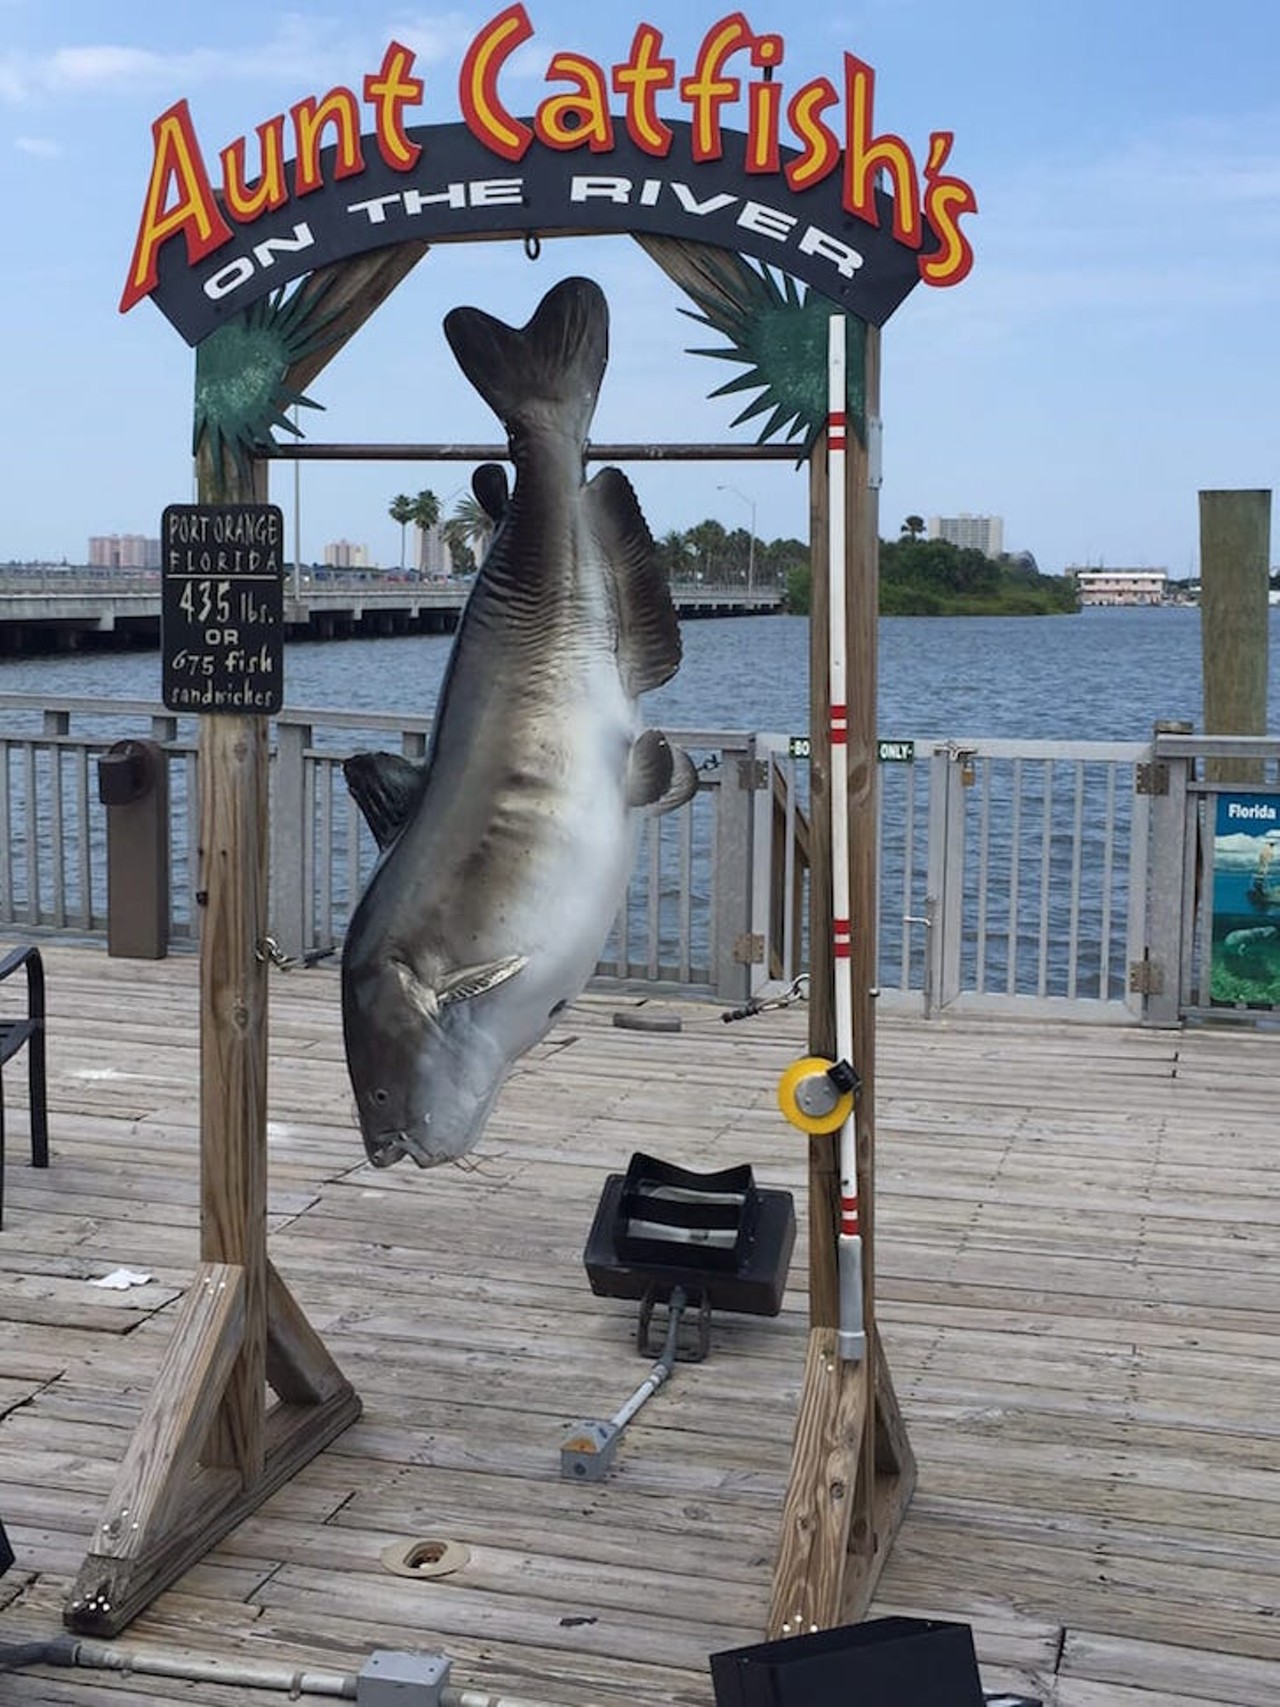 Aunt Catfish&#146;s on the River
4009 Halifax Drive, Port Orange, 386-767-4768
Family-owned stalwart in Port Orange serves up seafood southern-style, and don't forget to snap a selfie next to their trophy fish sign. 
Photo via Yelp